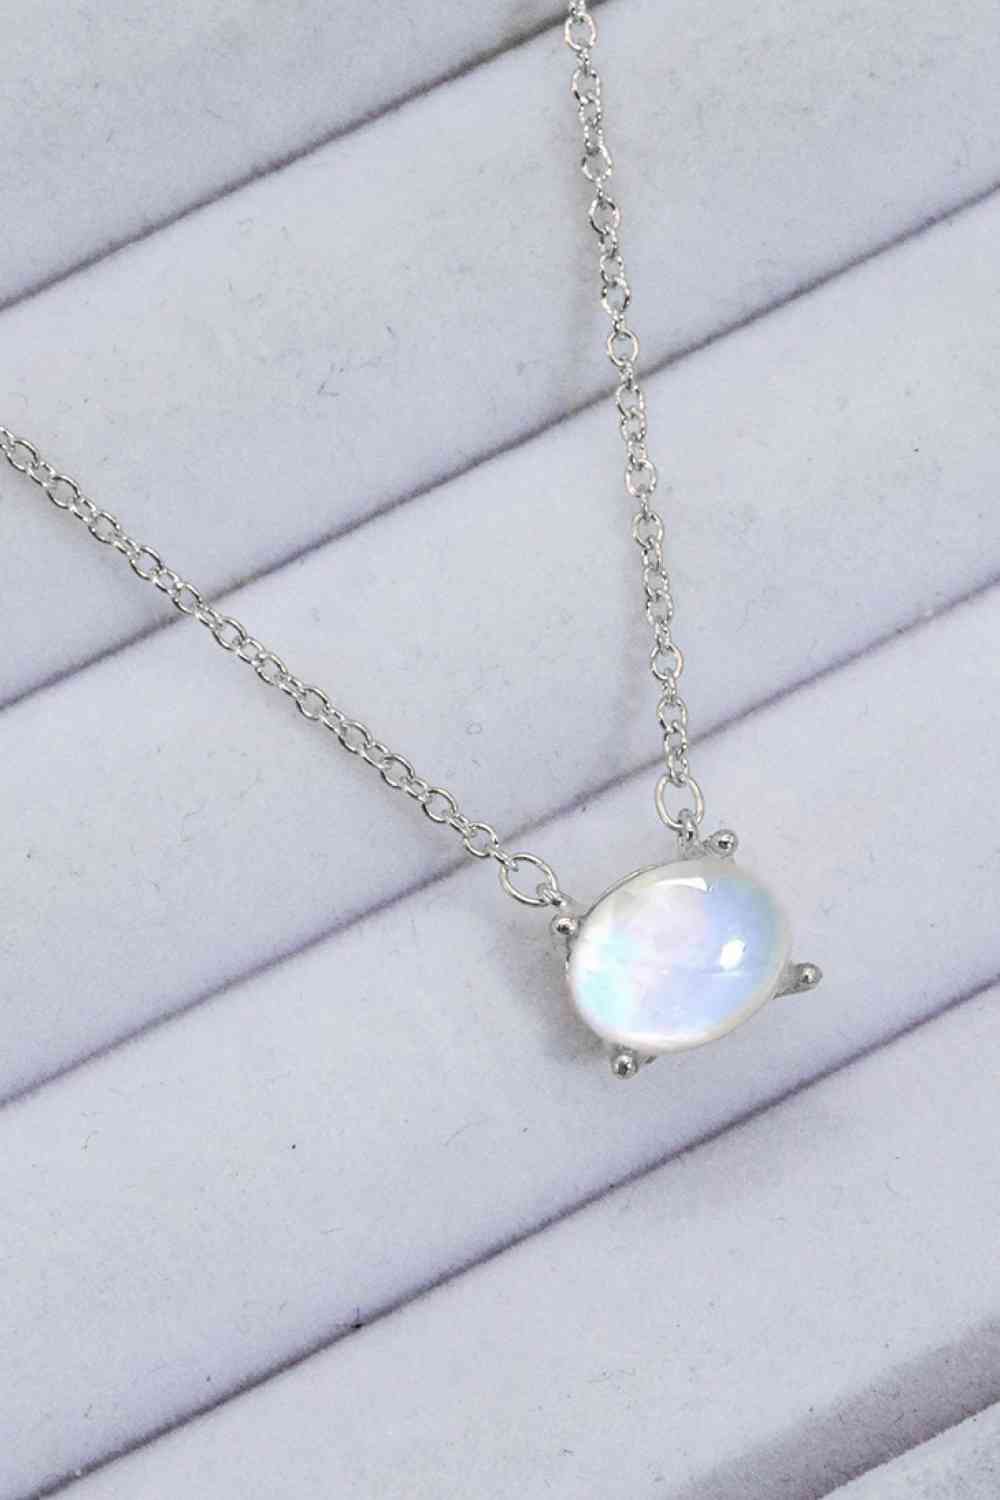 Oval Moonstone Pendant Necklace